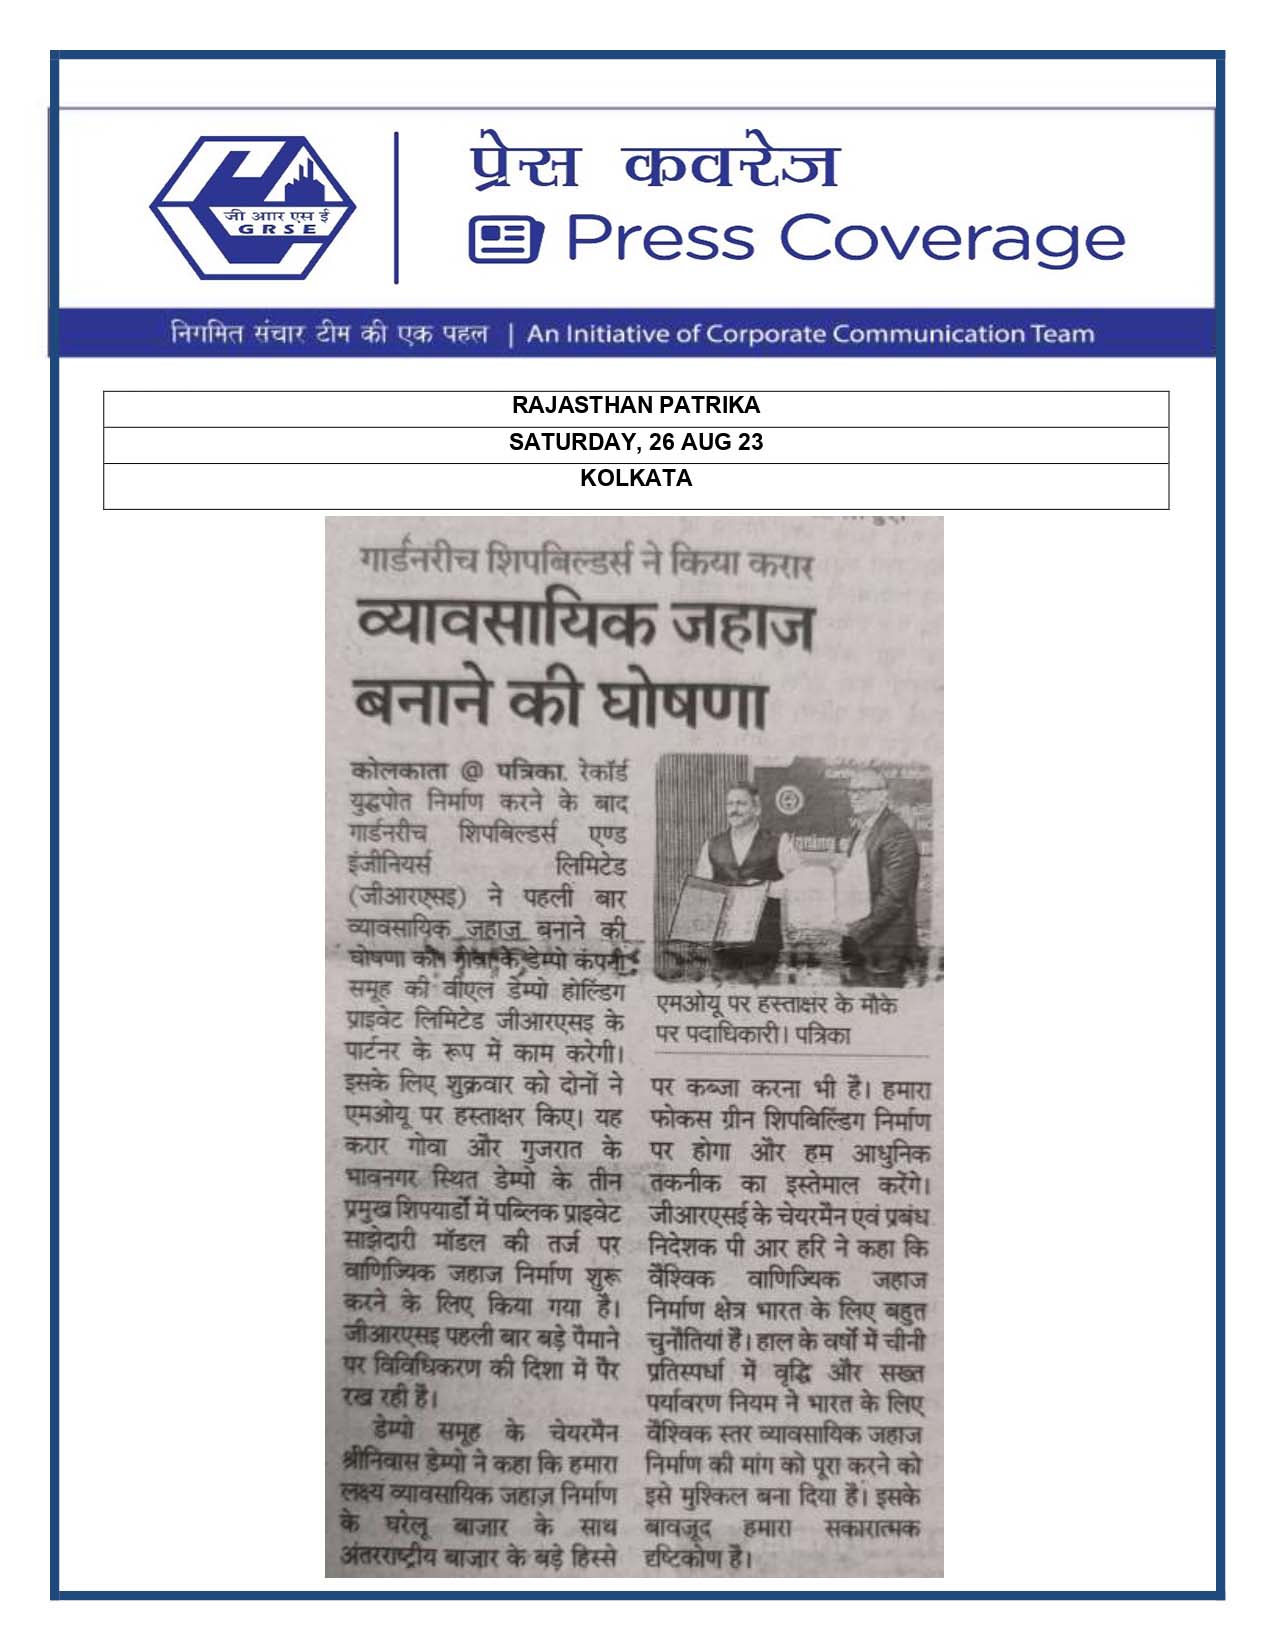 Press Coverage : Rajasthan Patrika, 26 Aug 23 : GRSE to build big commercial vessels